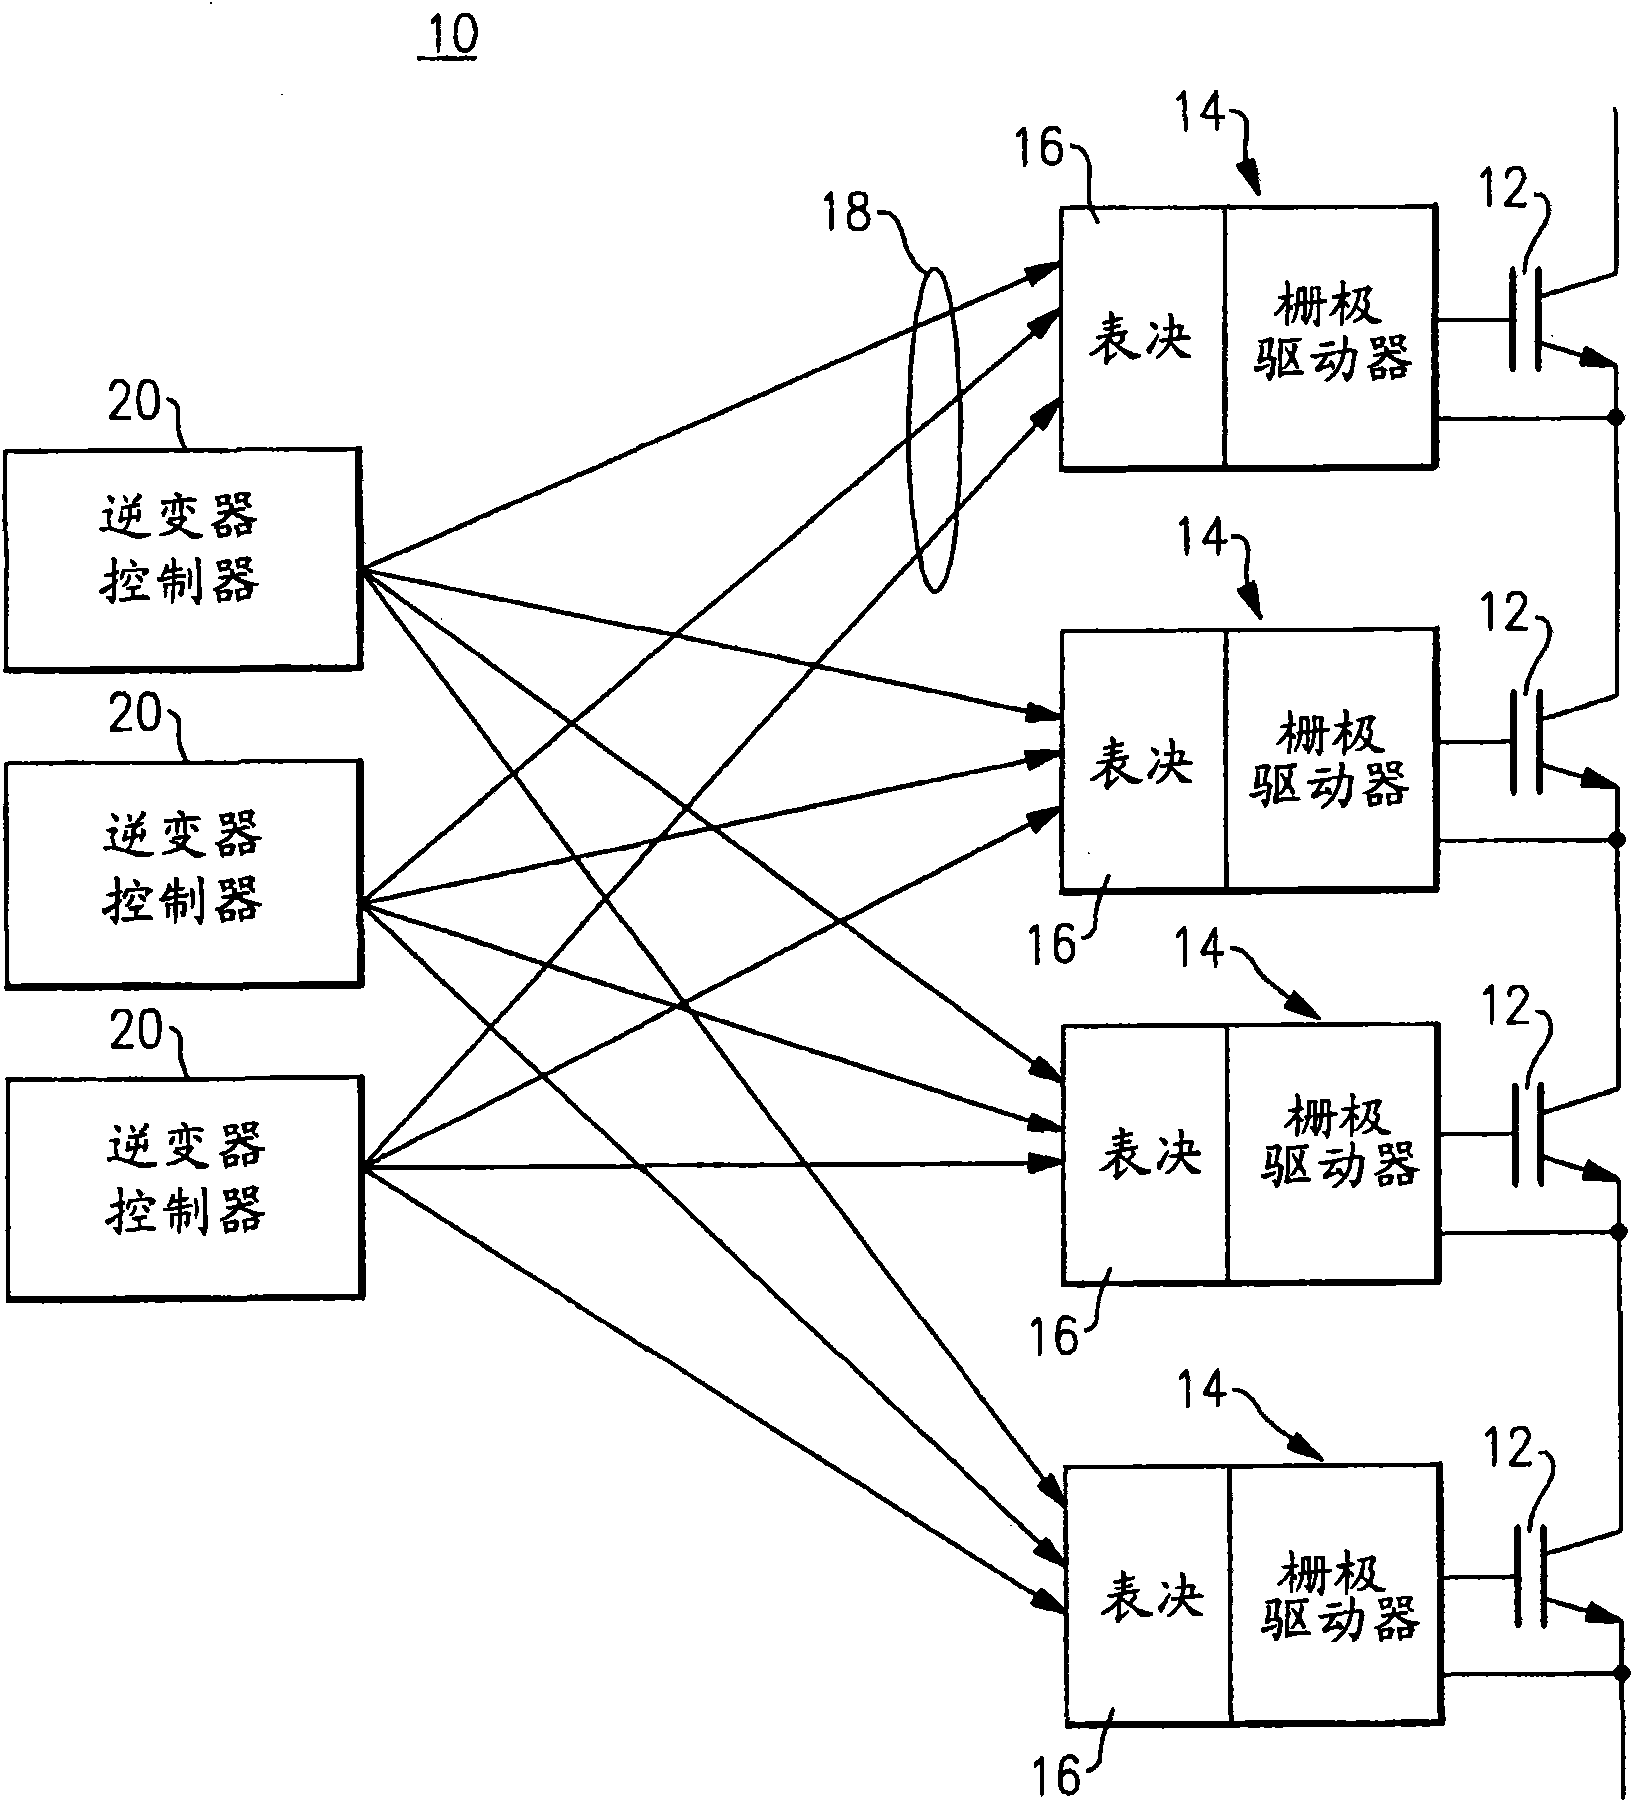 Circuit and topology for high-reliability power electronic device system